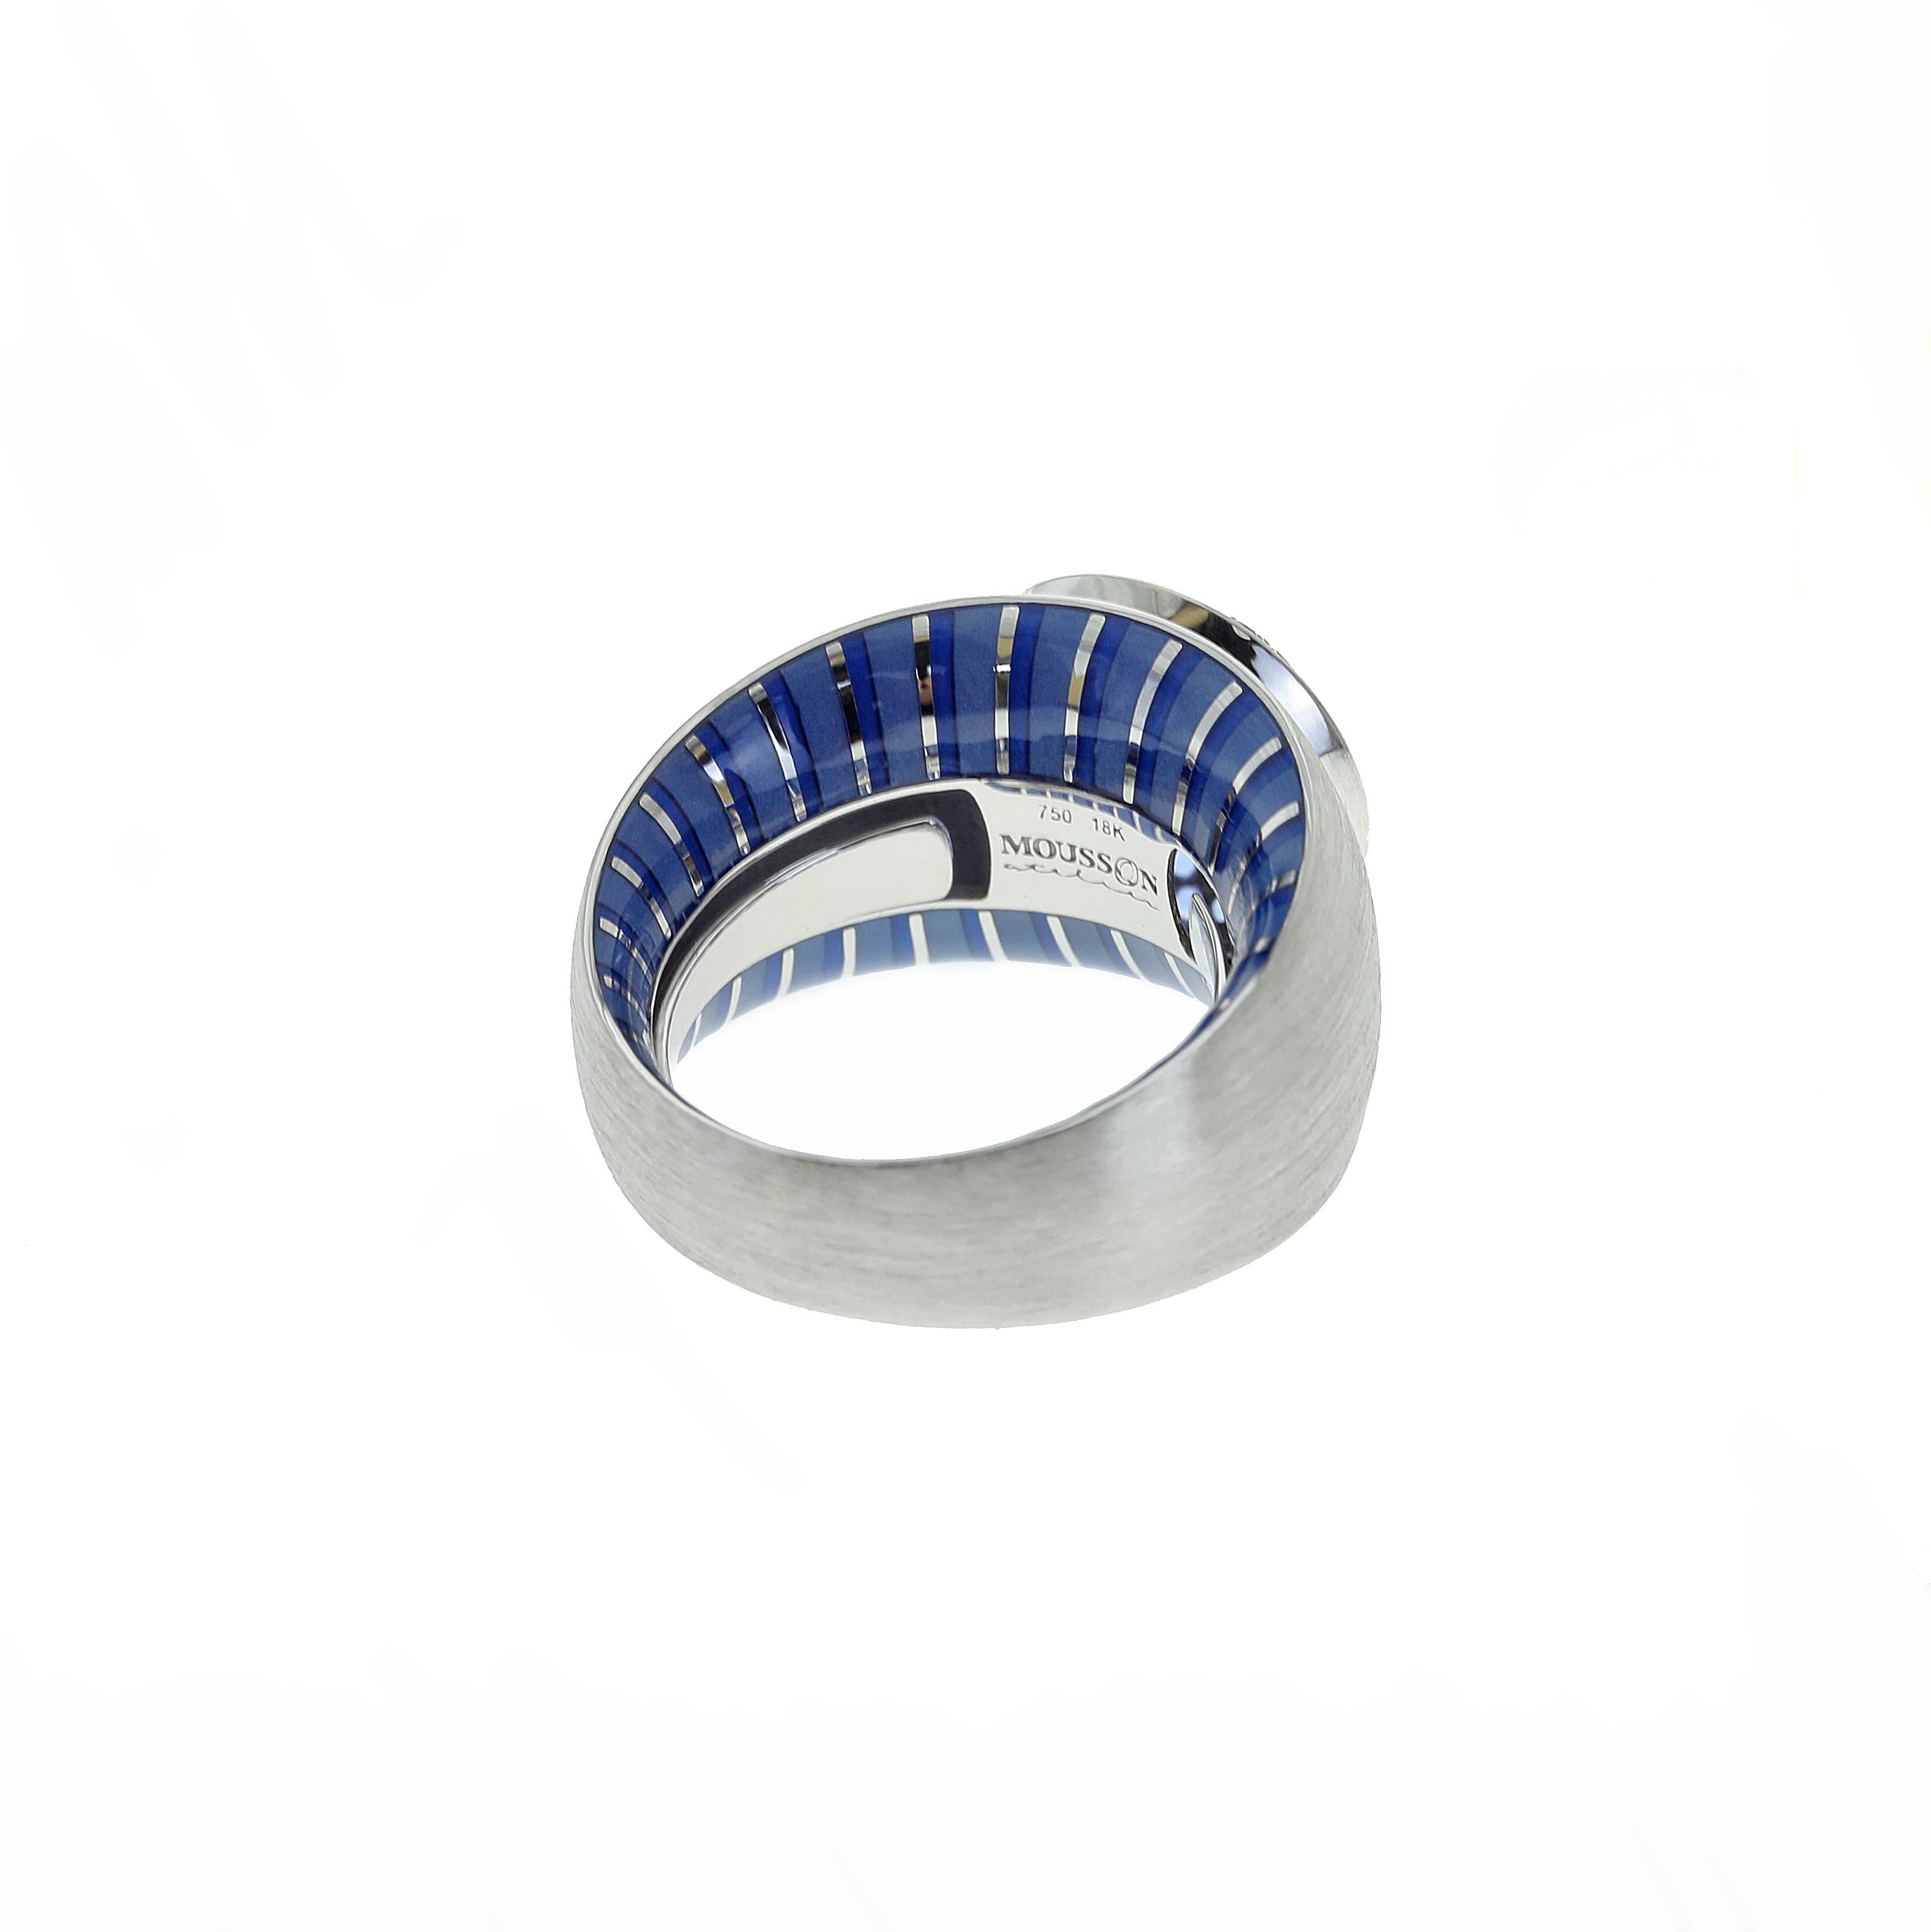 From our Kaleidoscope Collection - Blue Sapphire with Enamel, 18 Karat White Gold Ring. All outer surface with Silk Finishing. Enamel inside gives to this ring some hidden secret.

US Size 6 1/2
EU Size 52 3/4

24x14x27.3 mm
10.33 gm